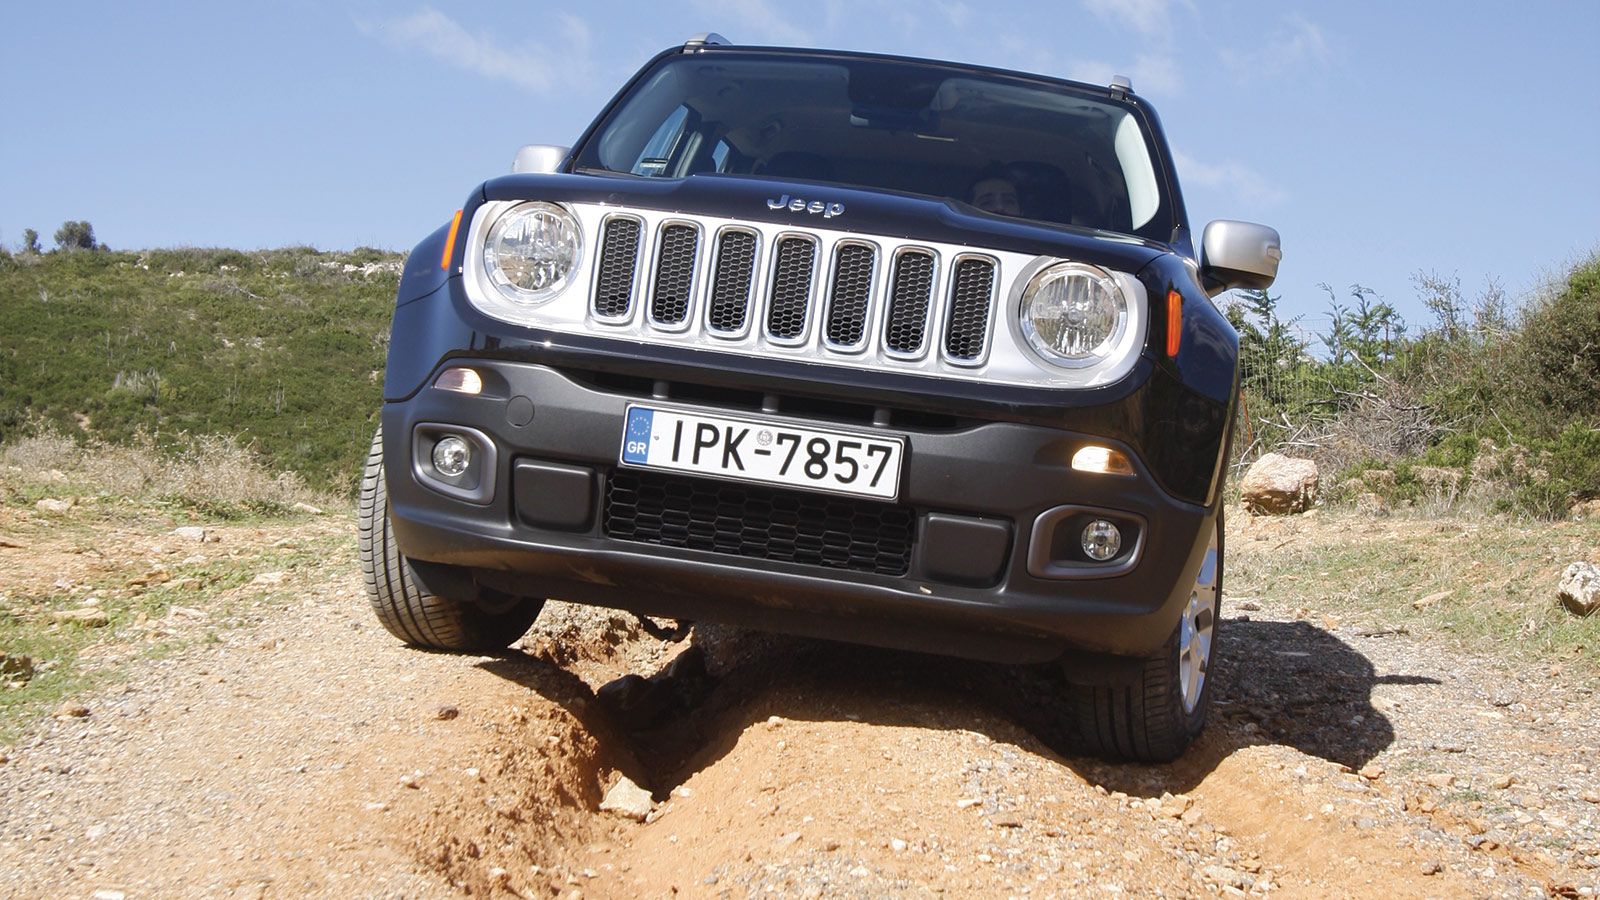 Test Renegade 1,4 170 PS jeep, jeep renegade